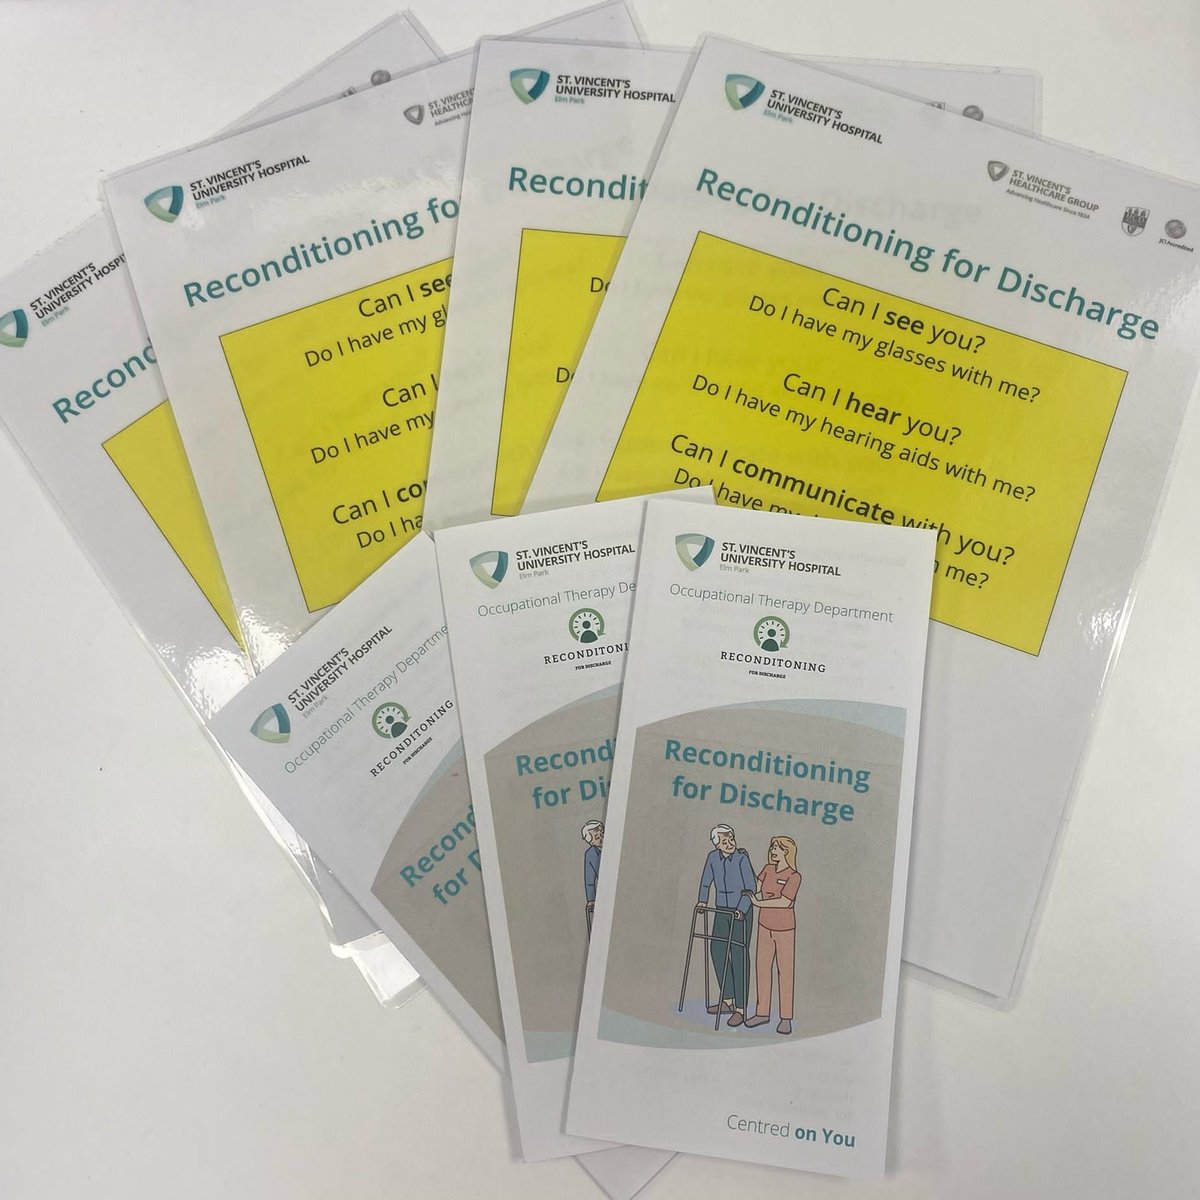 “Reconditioning for Discharge” pilot launches on 1 of our wards today. Our Med El OTs are leading the initiative, which aims to involve patients, families & all staff to increase patients' independence by getting out of bed, getting dressed & preparing for discharge from hospital